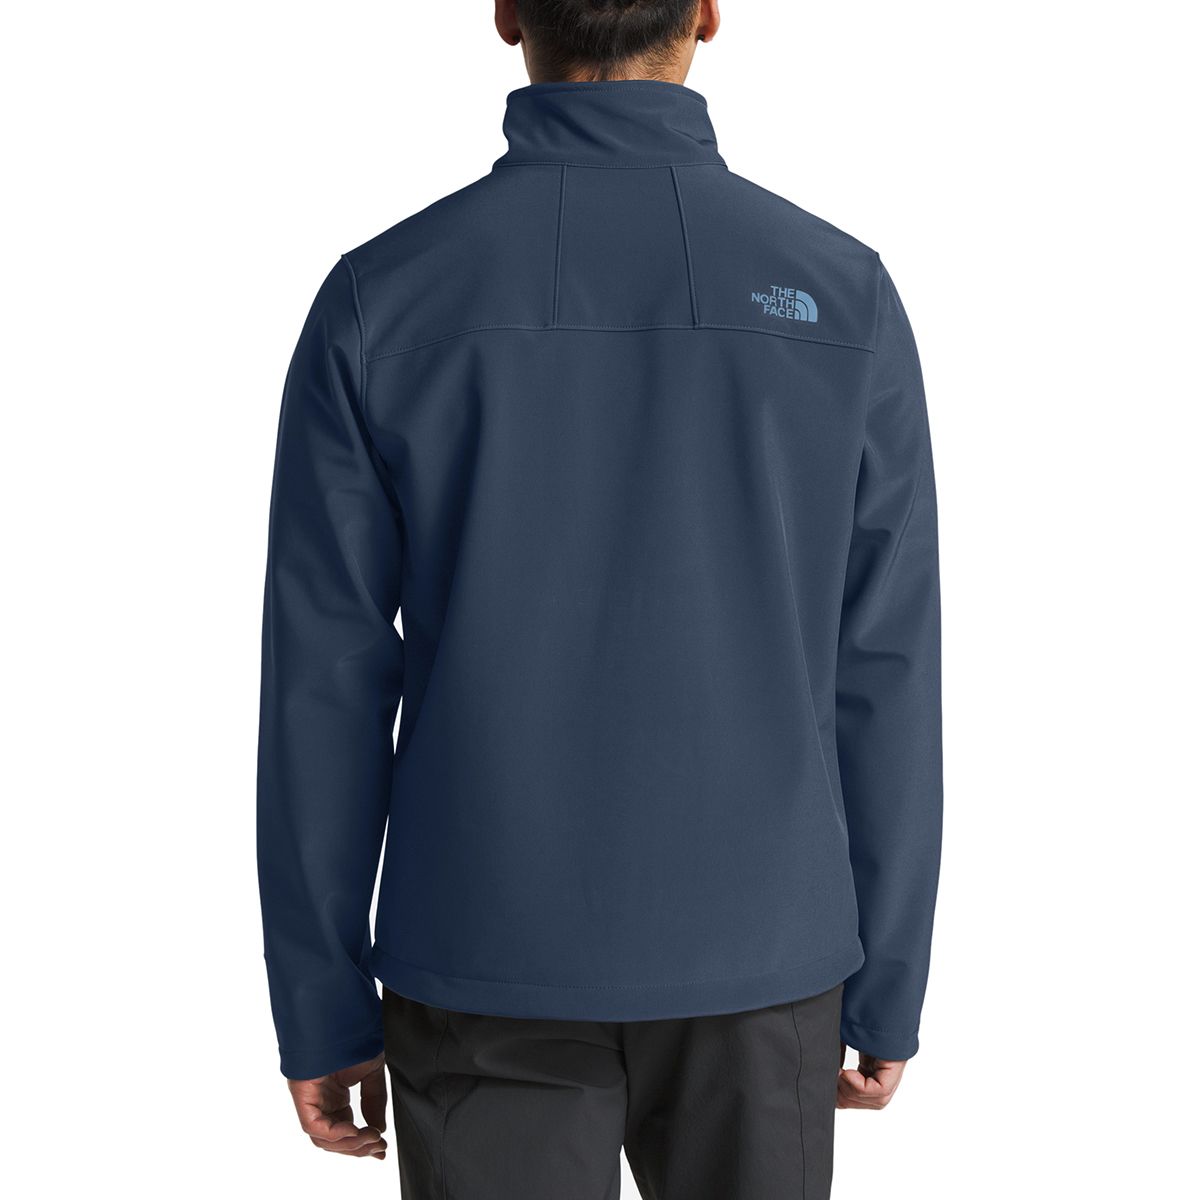 The North Face Apex Bionic 2 Softshell Jacket - Men's | Backcountry.com